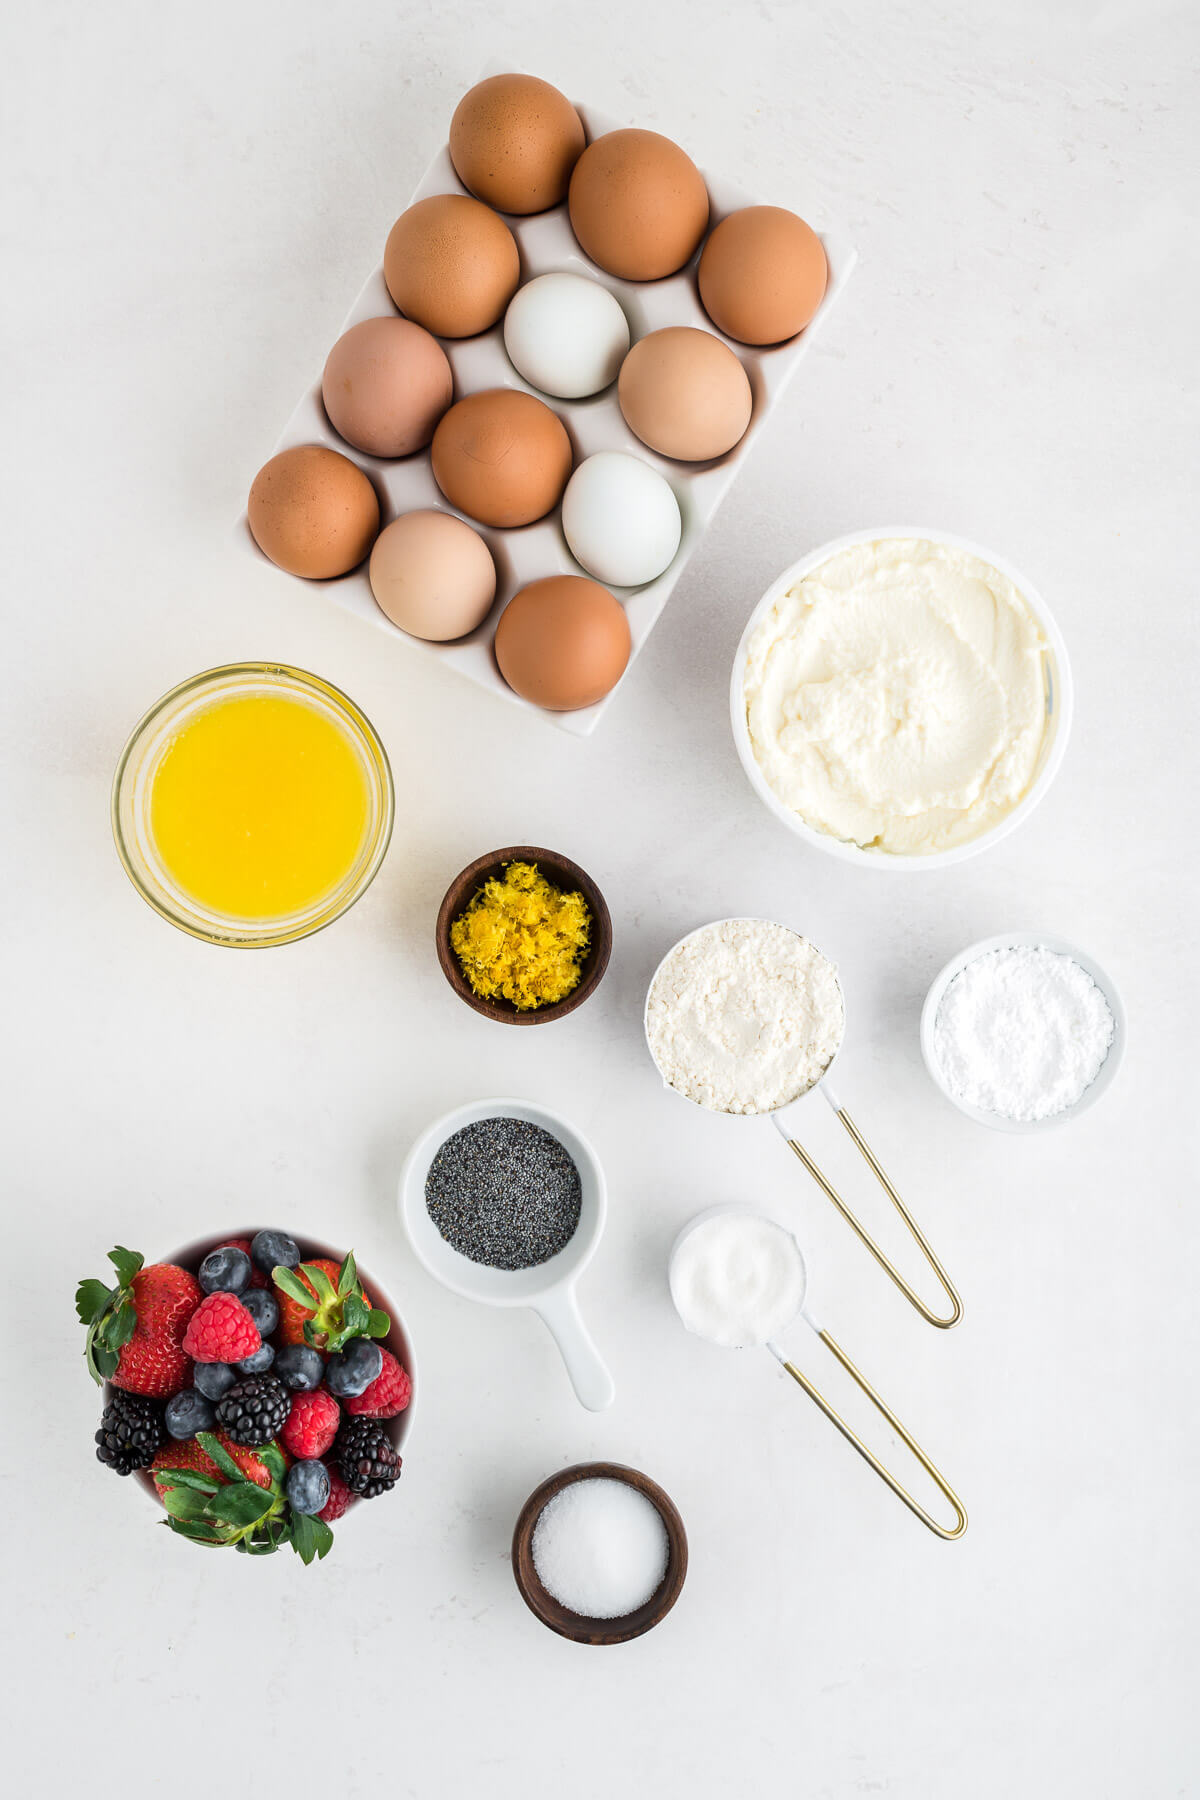 ingredients for lemon ricotta pancakes on a table.